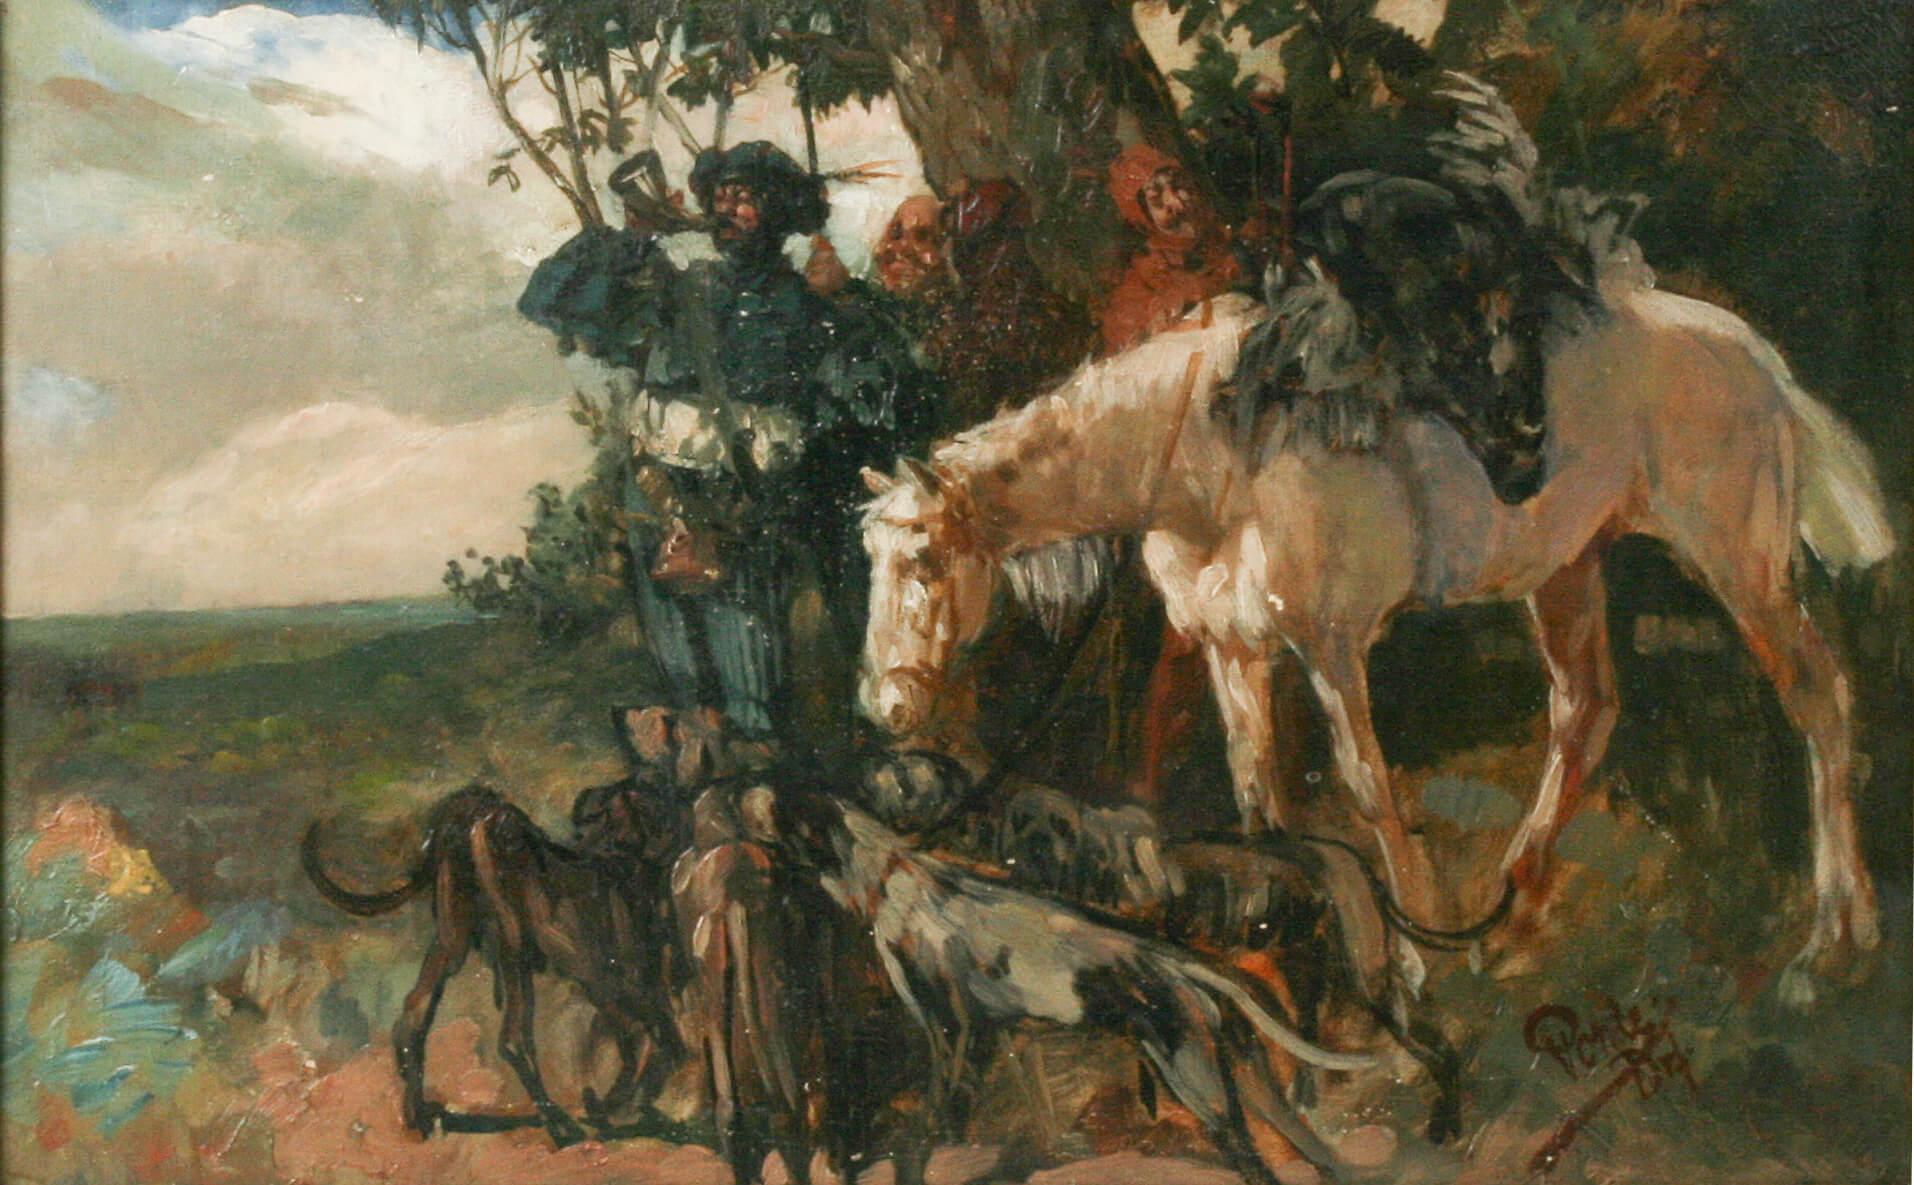 Oil on canvas. Signed lower right, Hermann Emil Pohle. The painting is a genre piece. A Renaissance style hunting scene. The hunting horn is blown before a retreat home. A wild boar has been taken. Dimensions frame: 60 x 82. Canvas: 37 x 60. In a